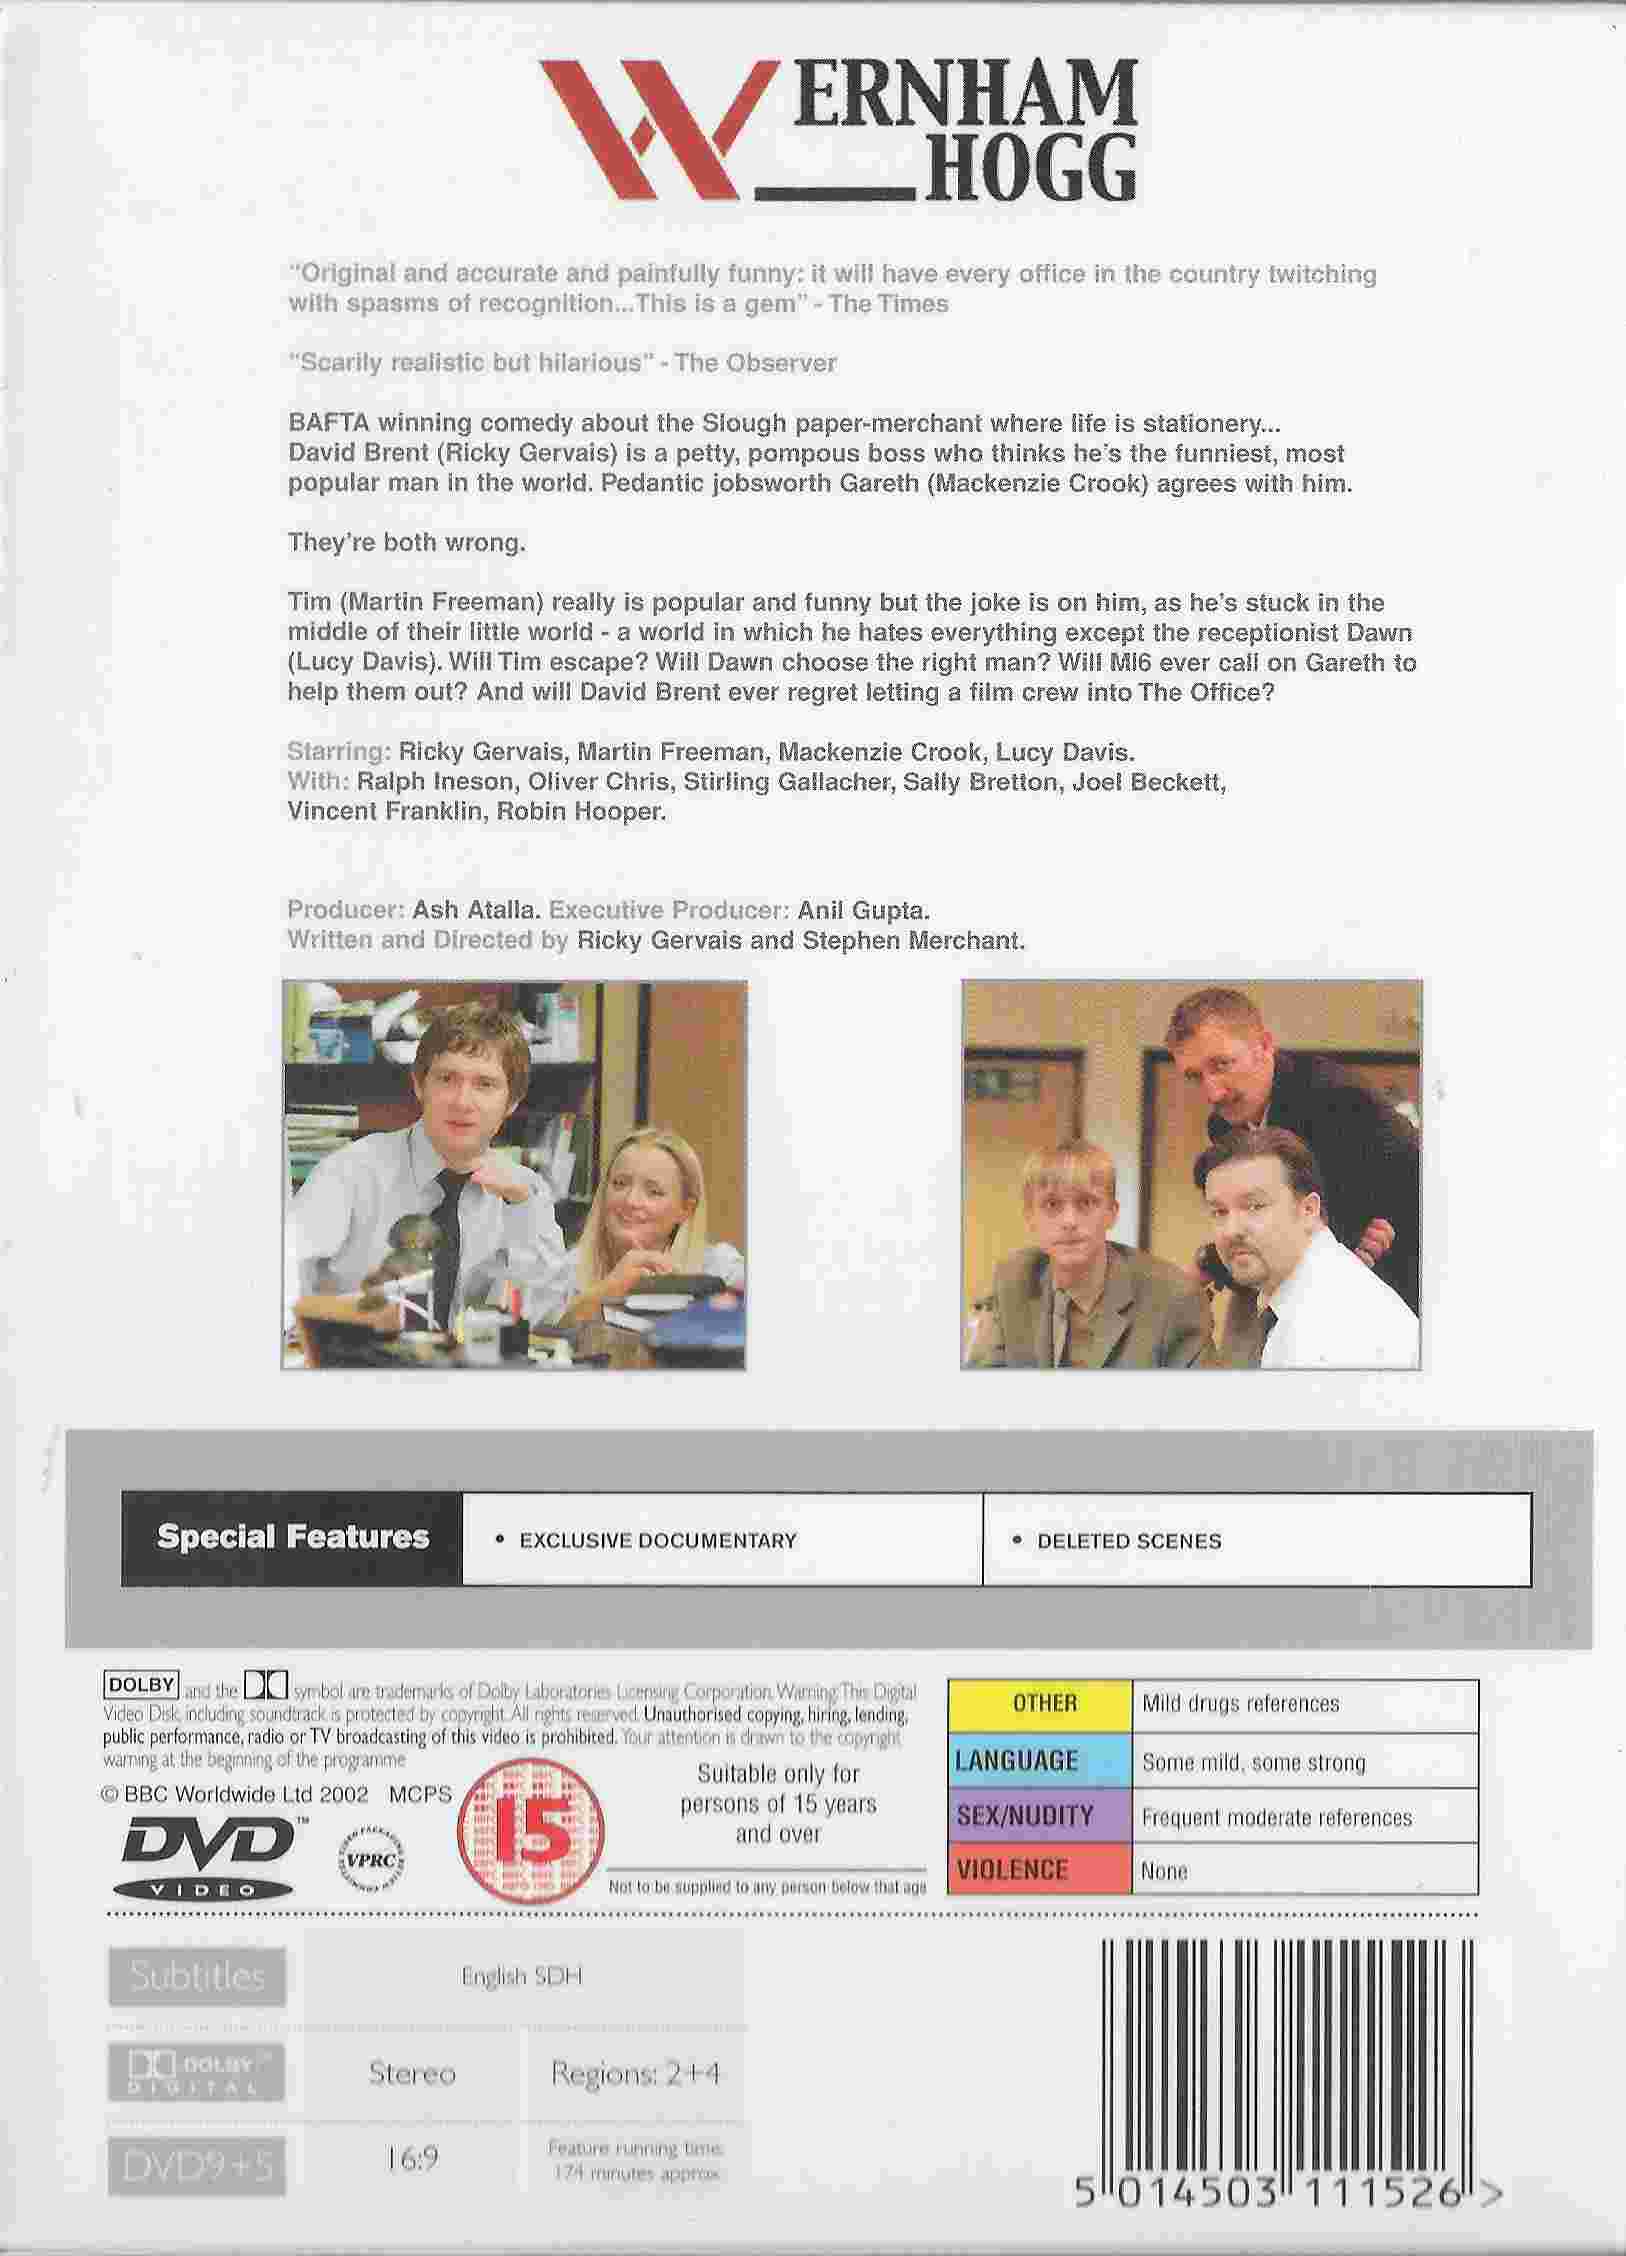 Picture of BBCDVD 1115 The office - The complete first series by artist Ricky Gervais / Steve Merchant from the BBC records and Tapes library